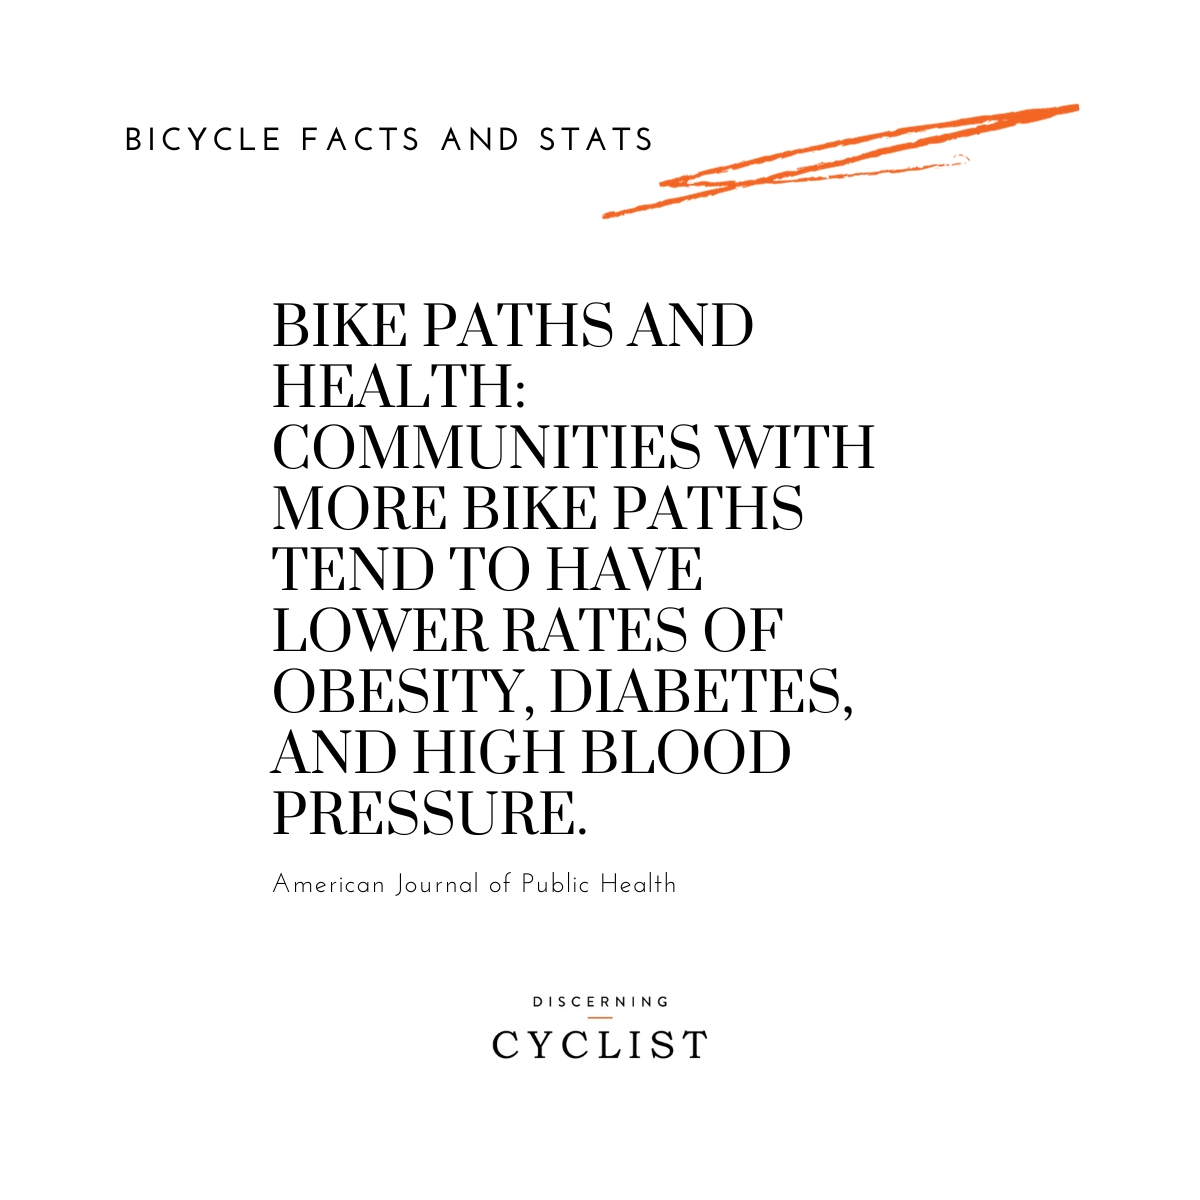 Bike Paths and Health: Communities with more bike paths tend to have lower rates of obesity, diabetes, and high blood pressure.